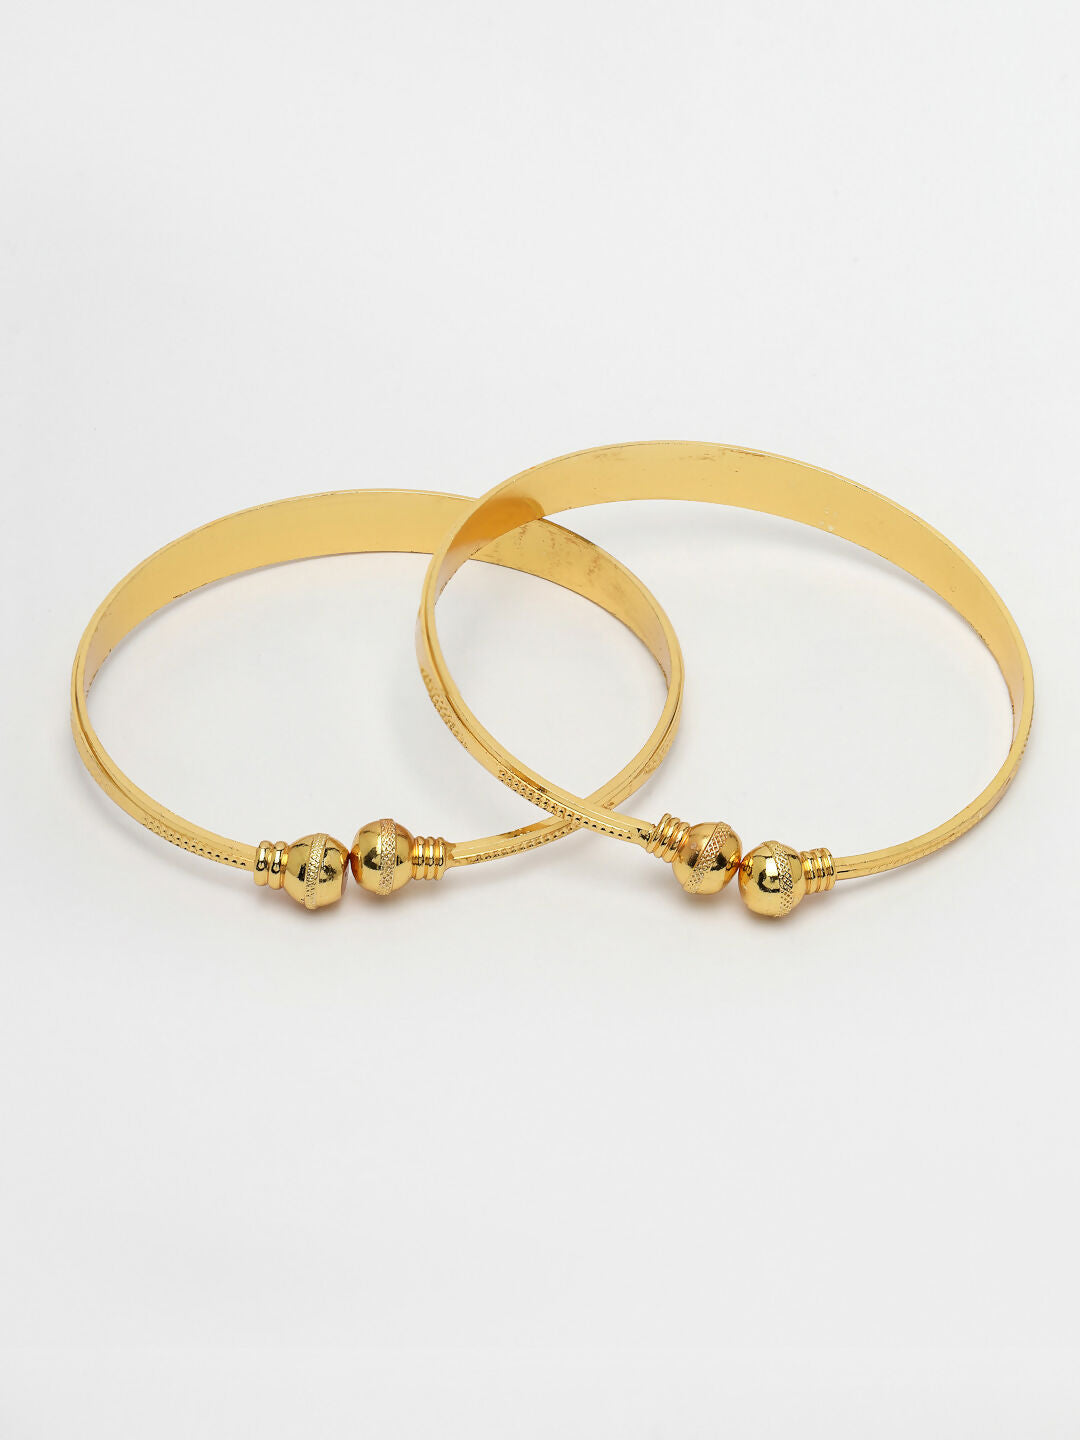 NVR Women's Set of 2 Gold-Plated Handcrafted Adjustable Bangles - Distacart